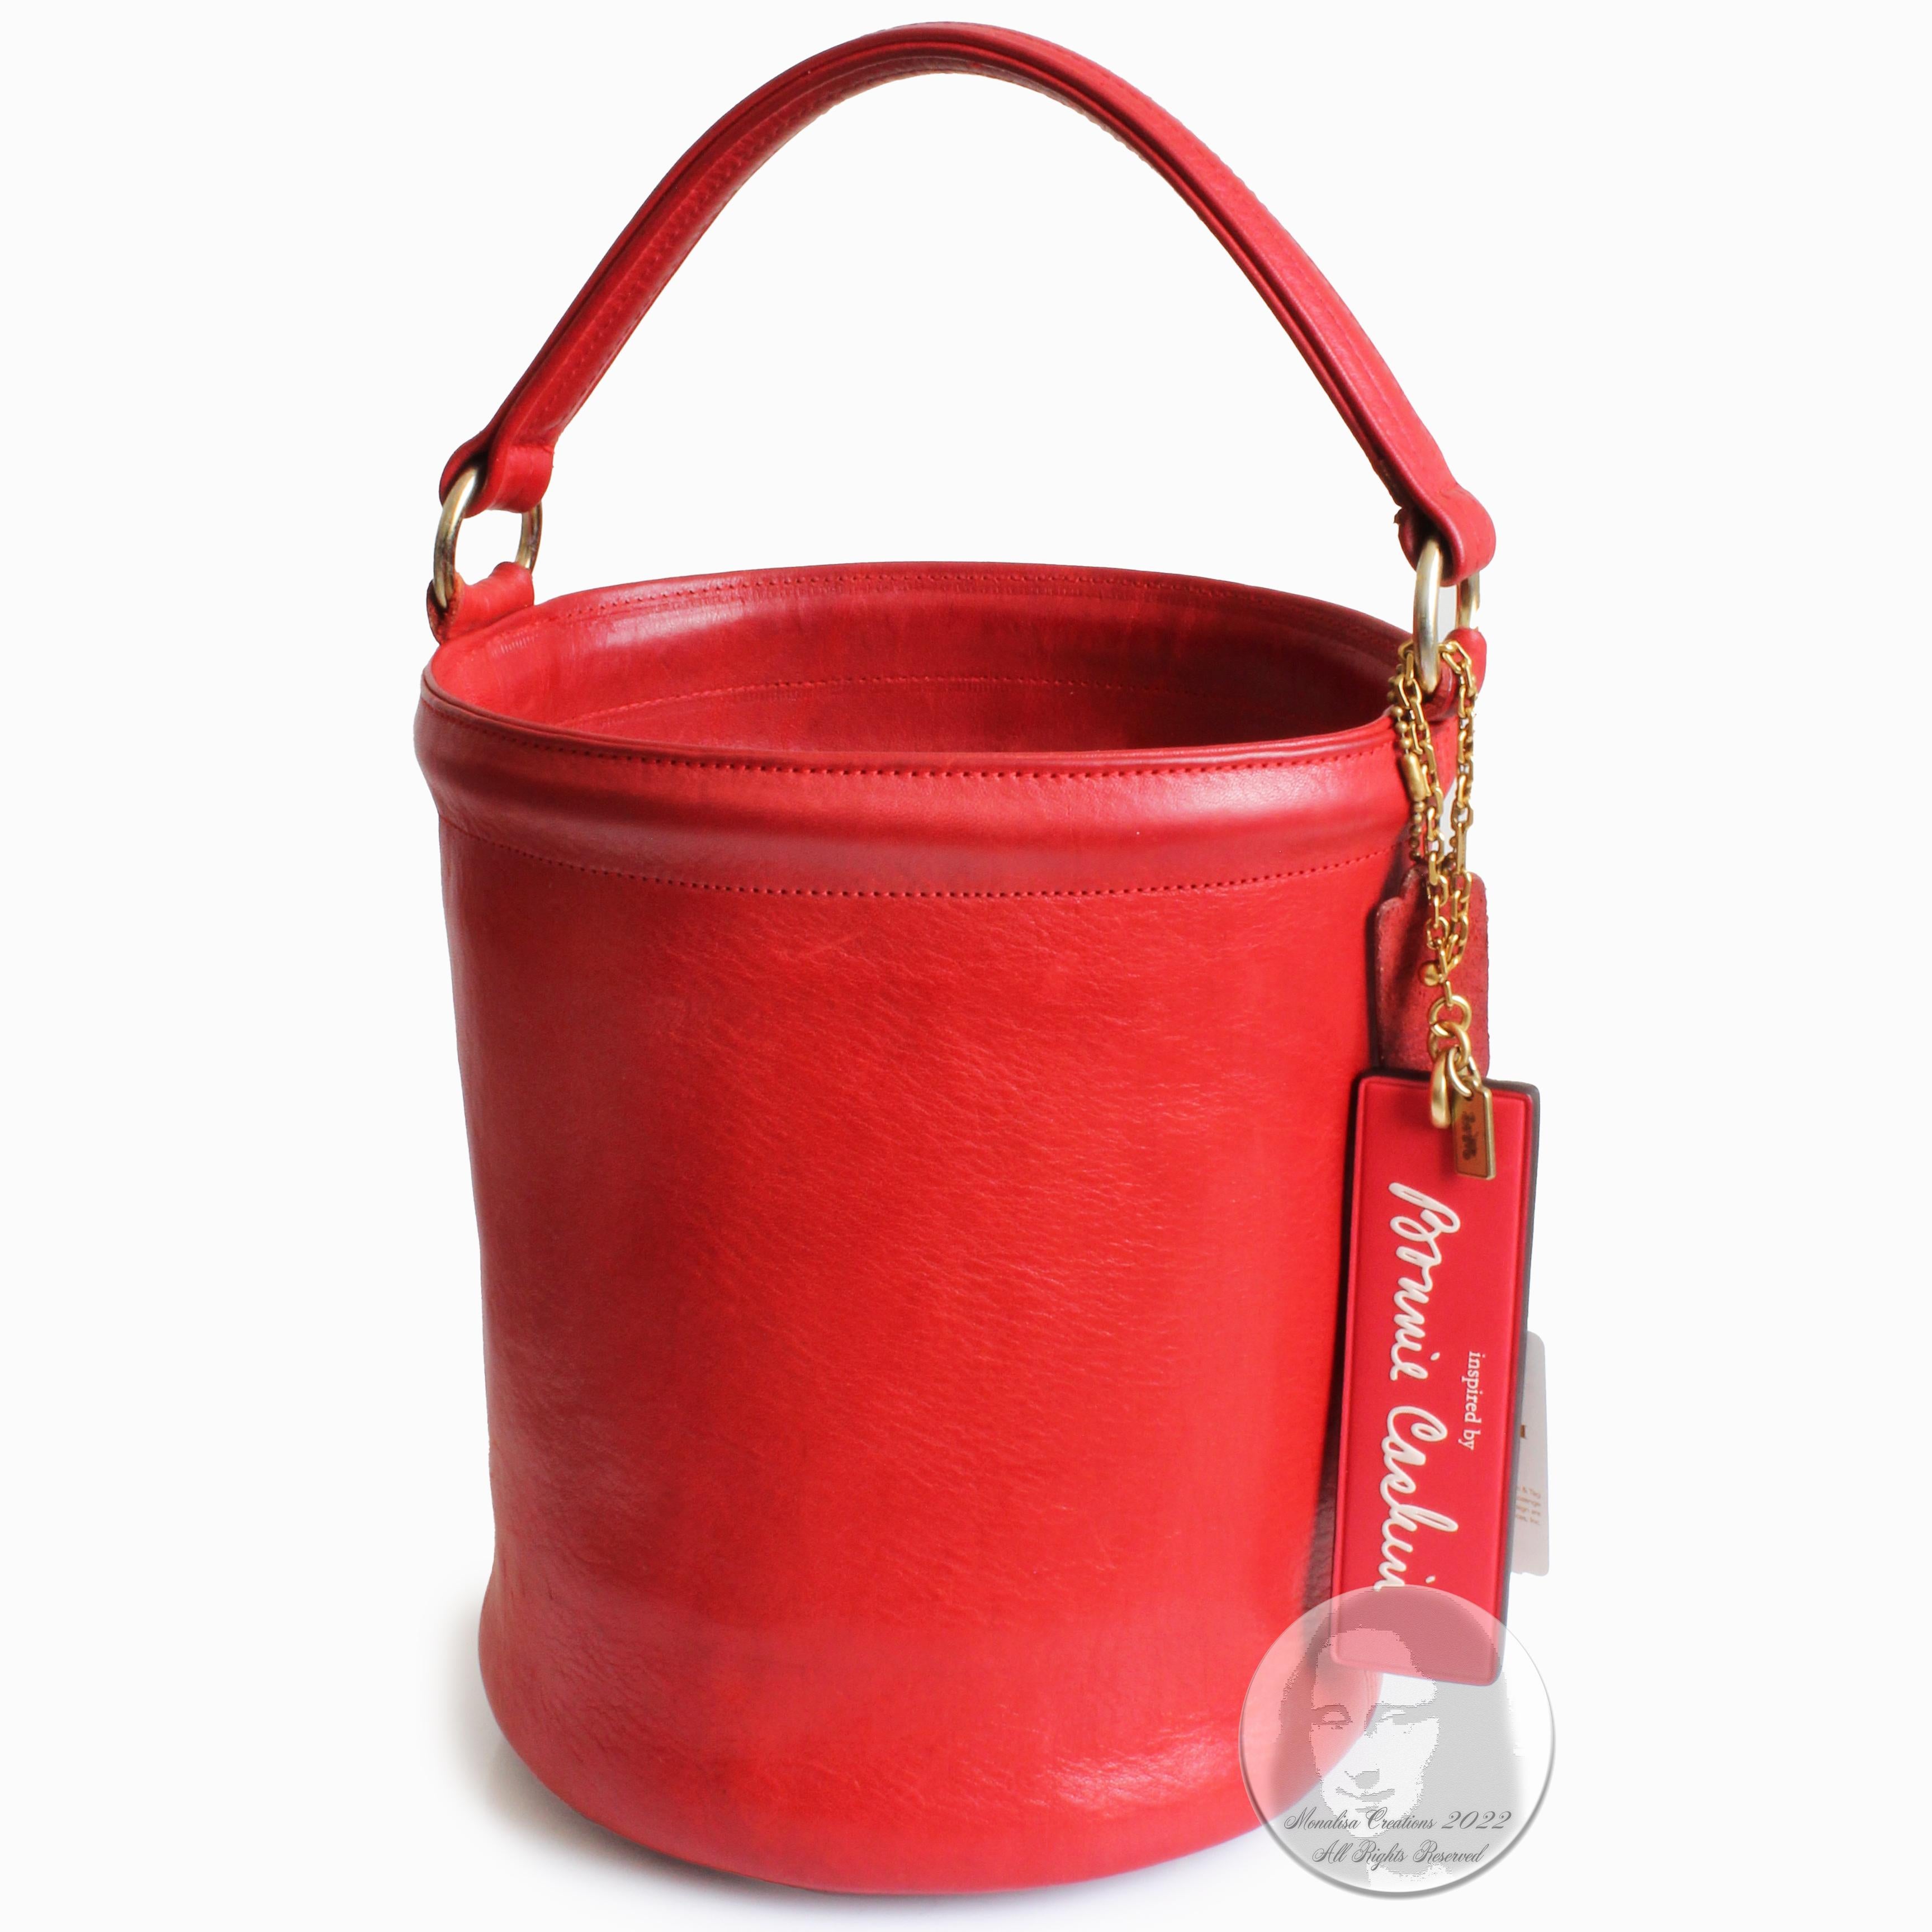 Authentic, preowned, vintage Bonnie Cashin for Coach Feed Bag Bucket Tote, likely made in the 60s.  Made from red leather, it's lined in Bonnie's signature stripe fabric lining with one leather trimmed inner slip pocket, and features four metal feet